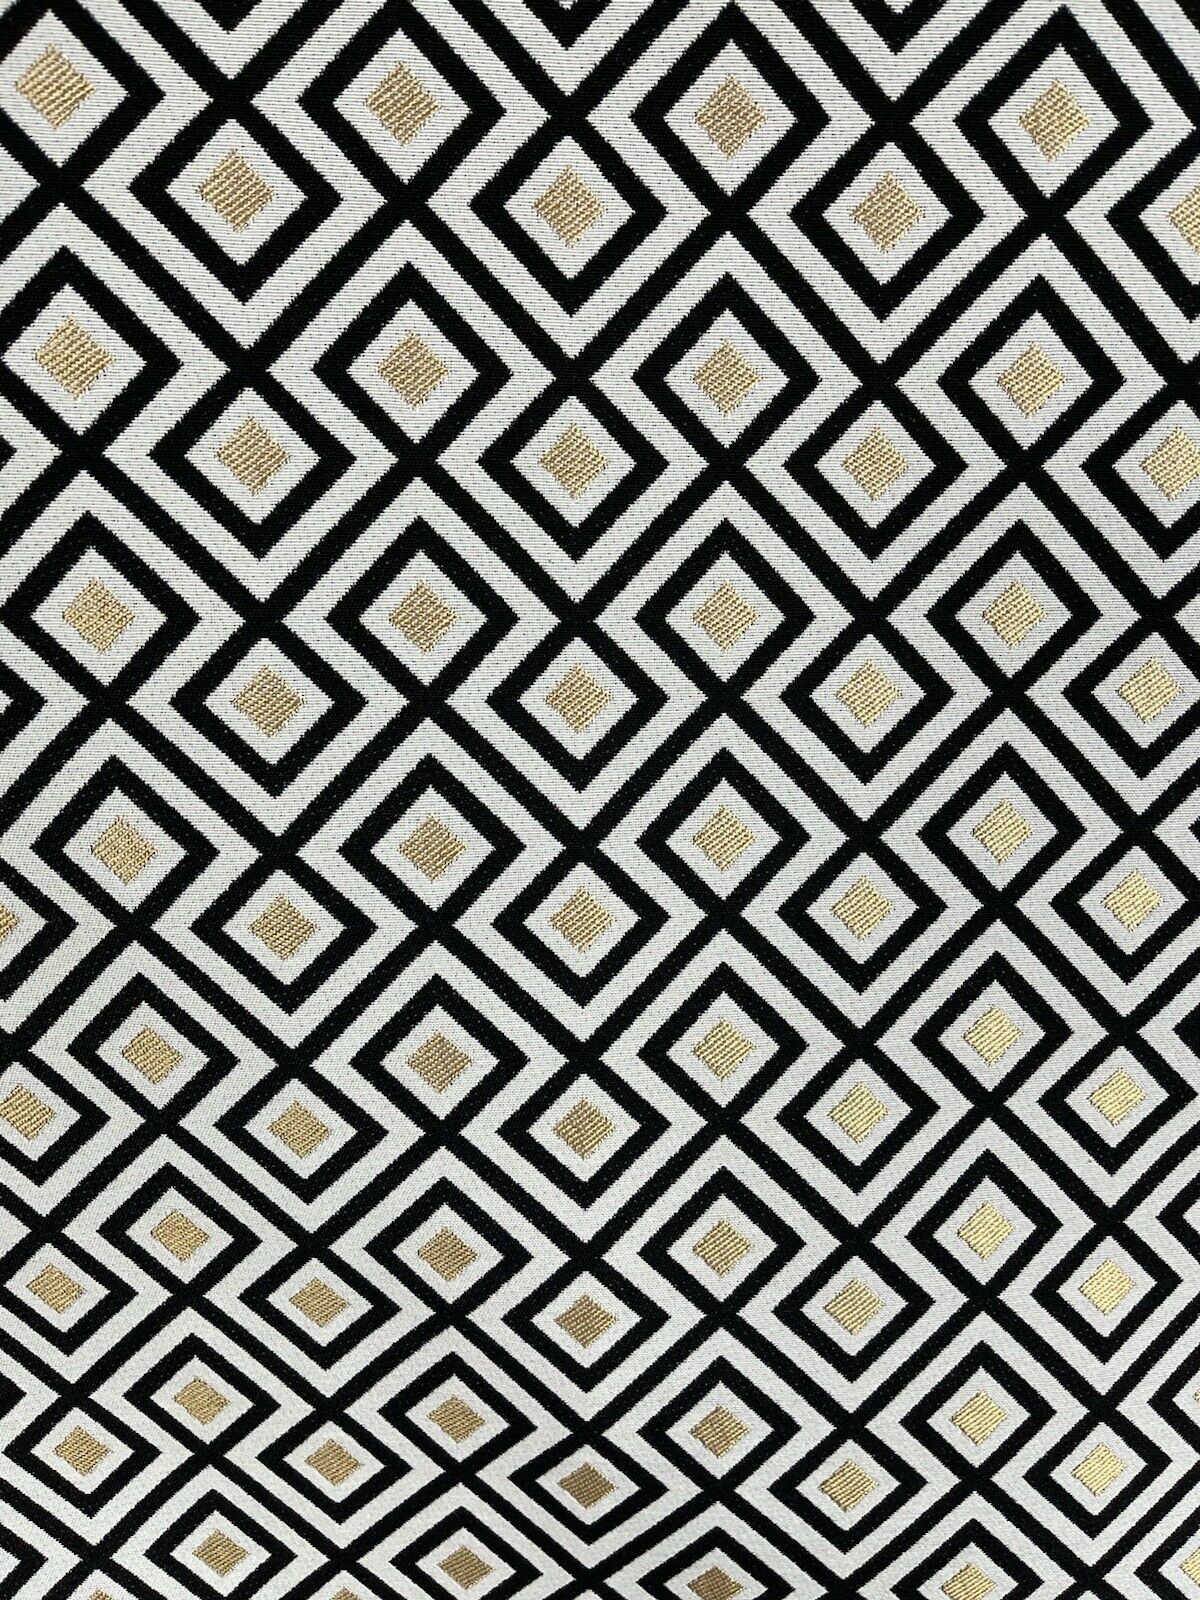 Art Deco Blocks Woven Fabric by Meter Gold Upholstery Textile Black White Sewing Material